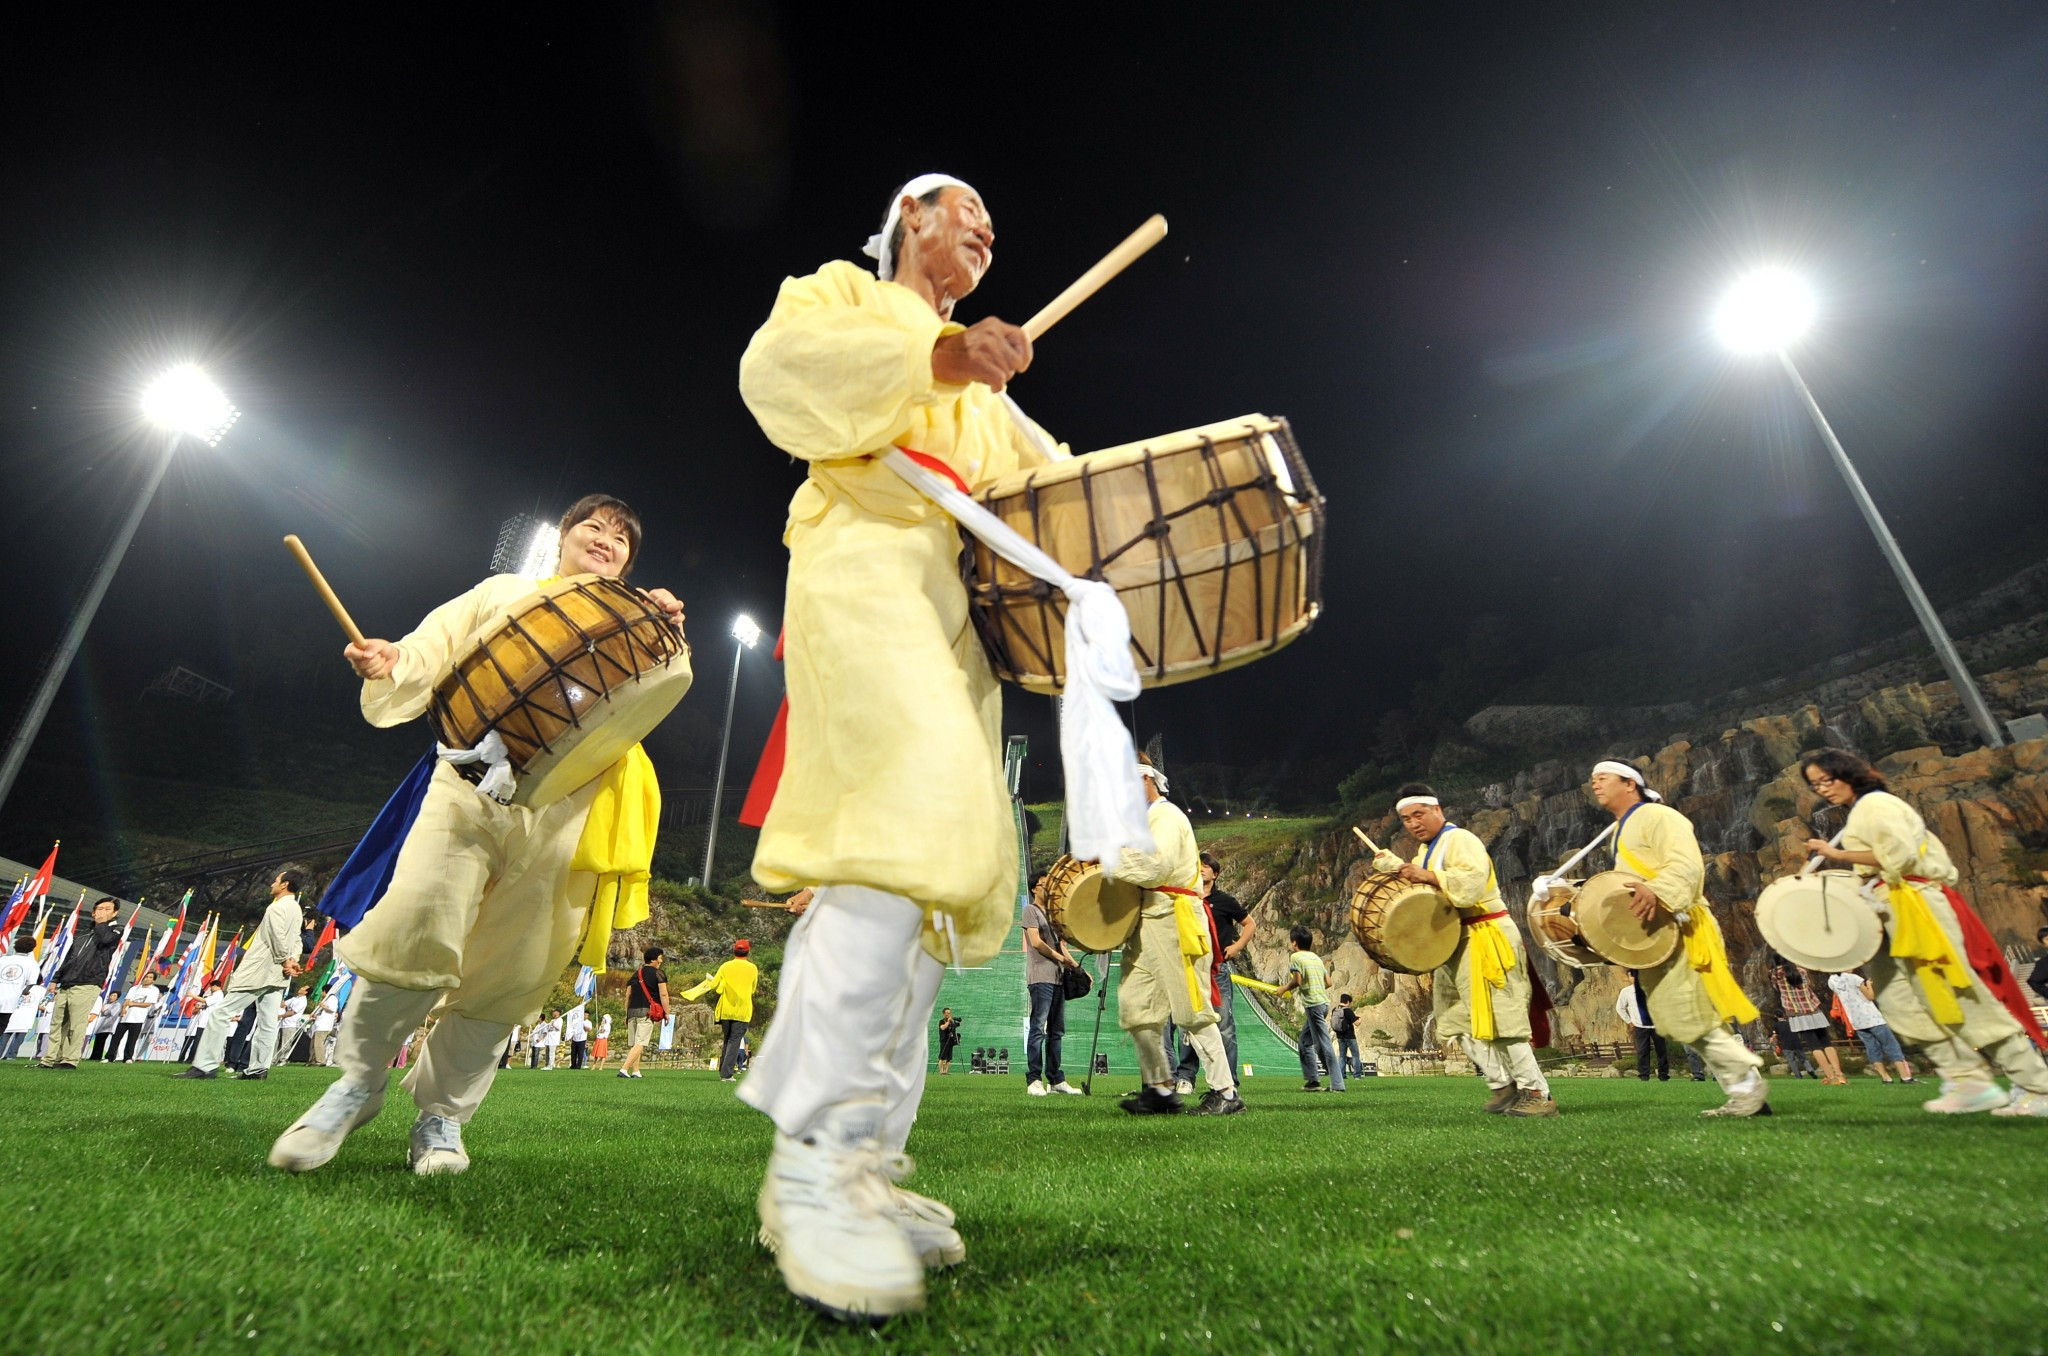 Many cultural activities are taking place to promote Pyeongchang 2018 ©Pyeongchang 2018